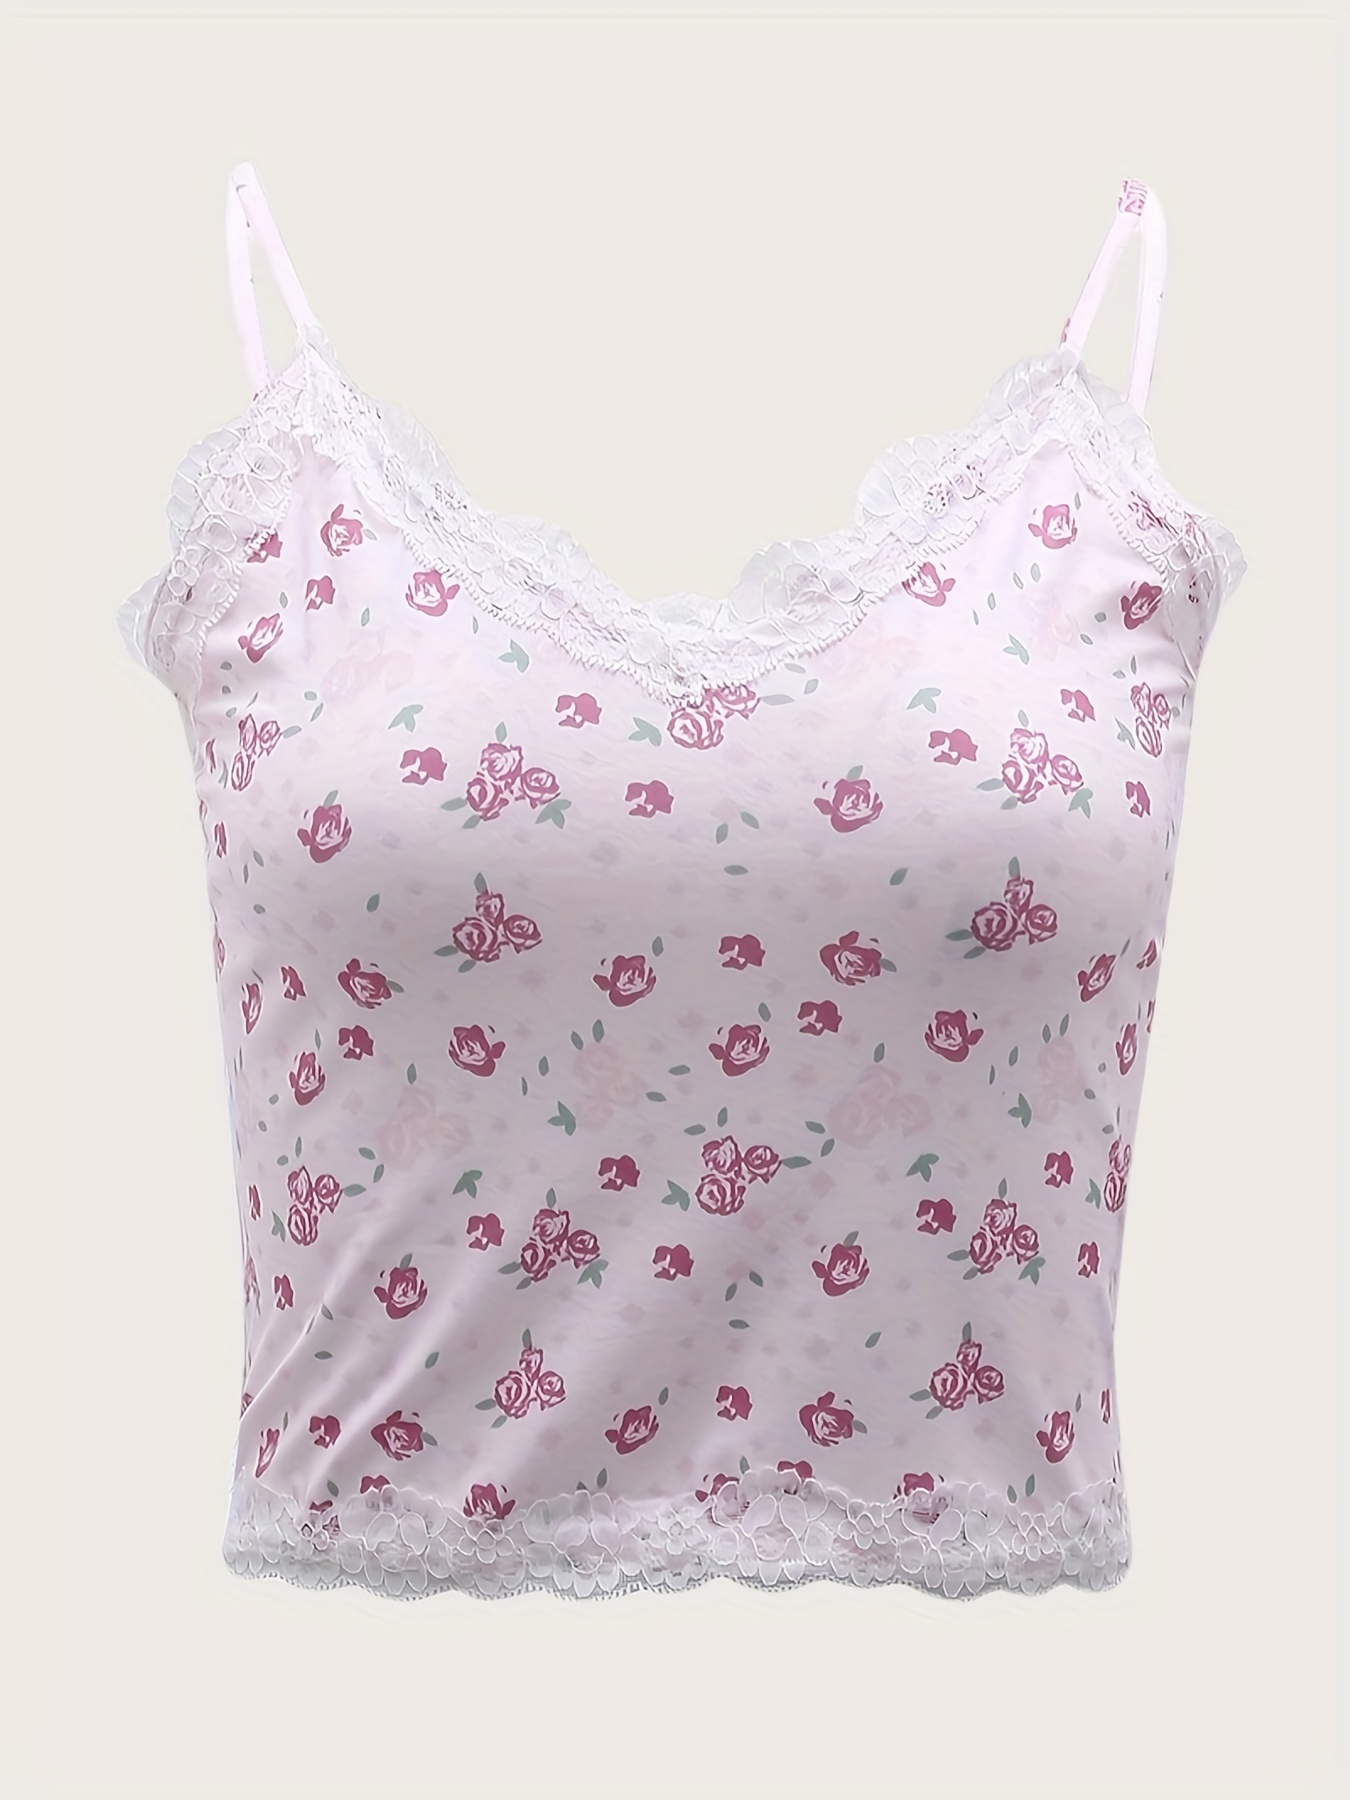 Floral Print Sexy Cami Top, Sleeveless Cute Every Day Top For All Season,  Women's Clothing